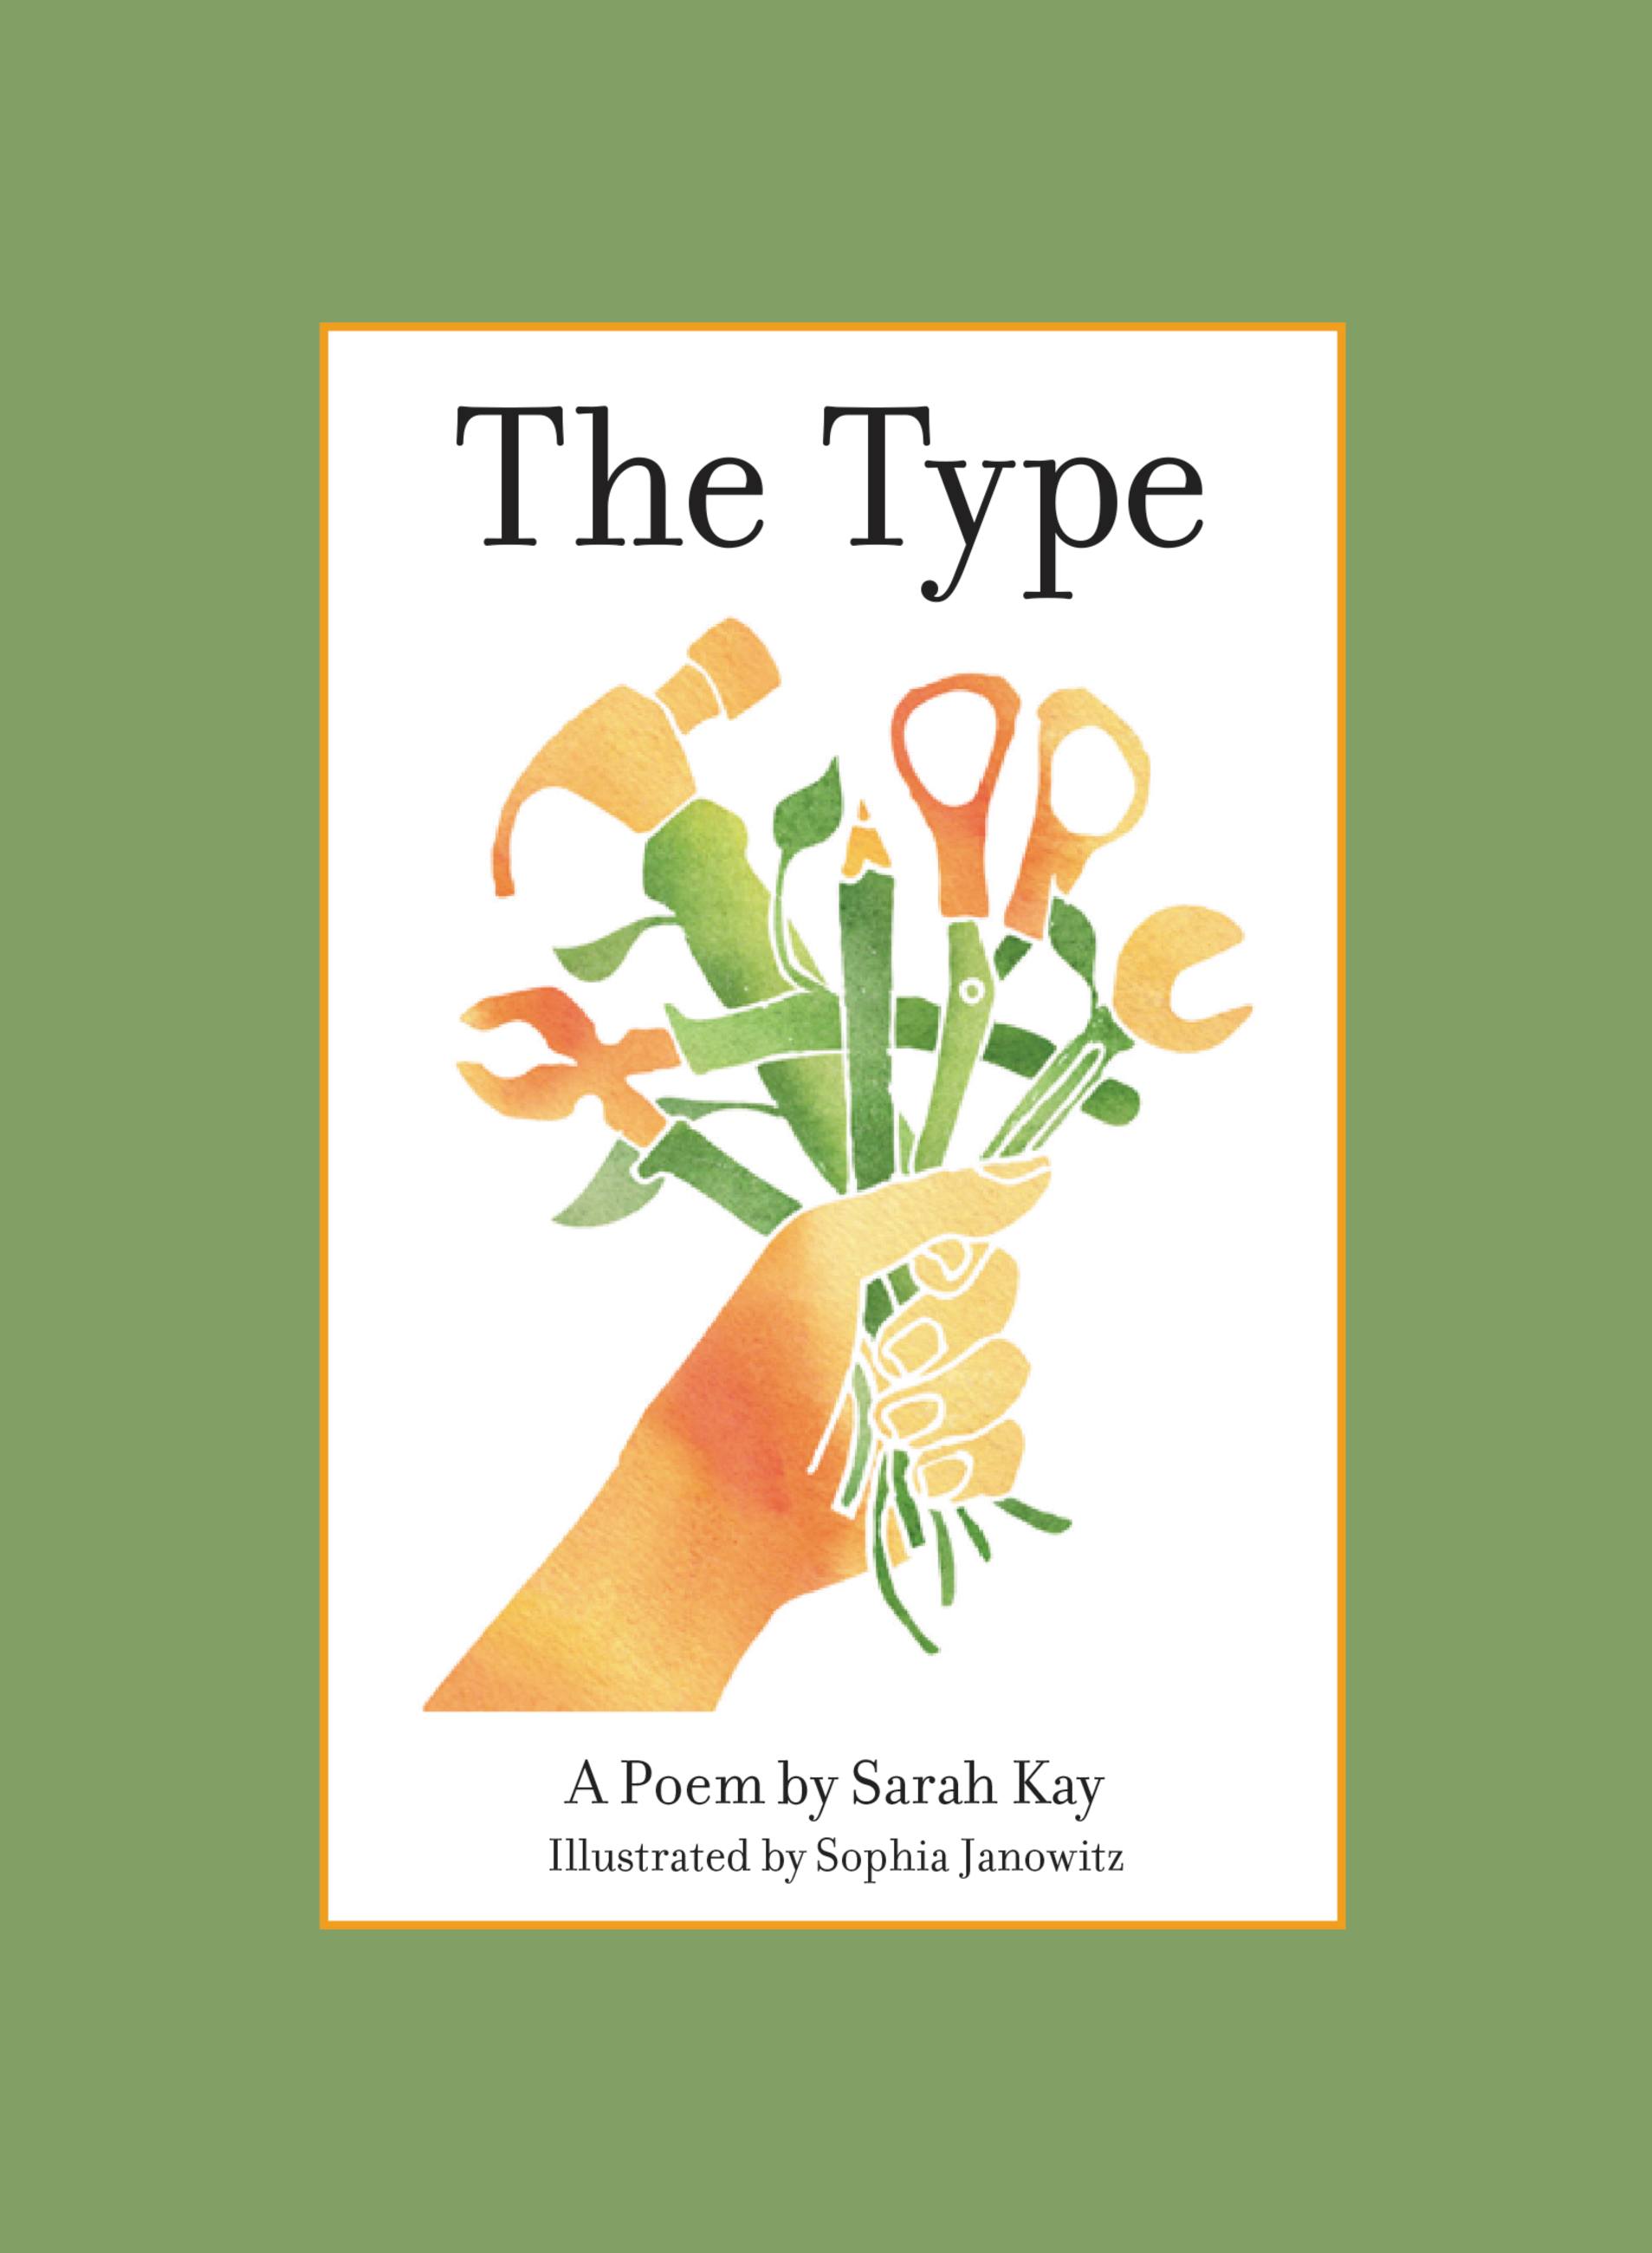 The Type by Sarah Kay